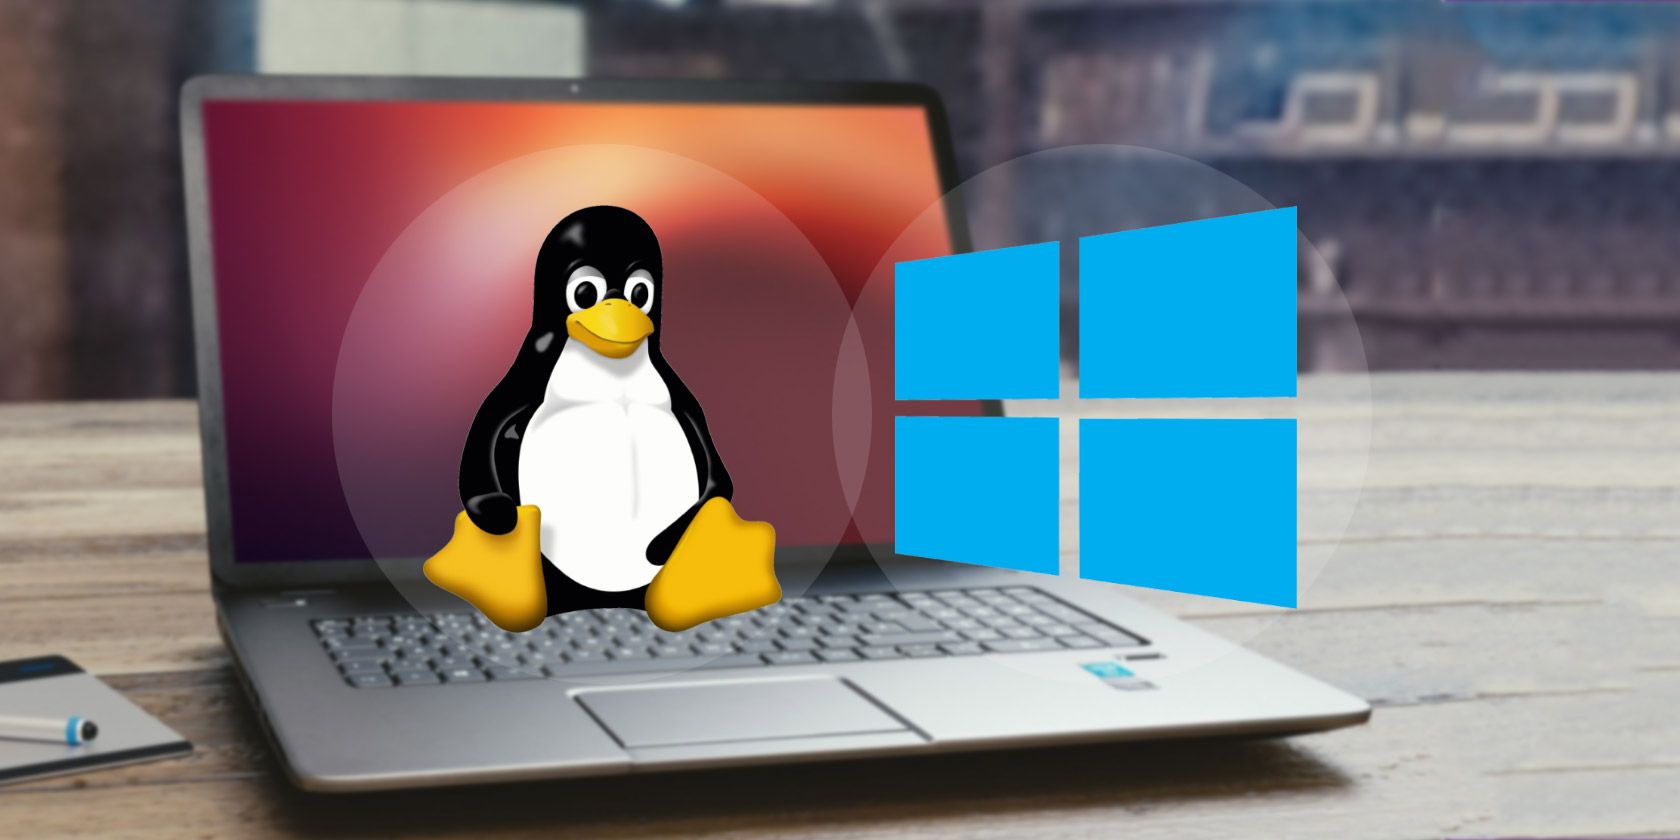 dual boot windows 10 and arch linux